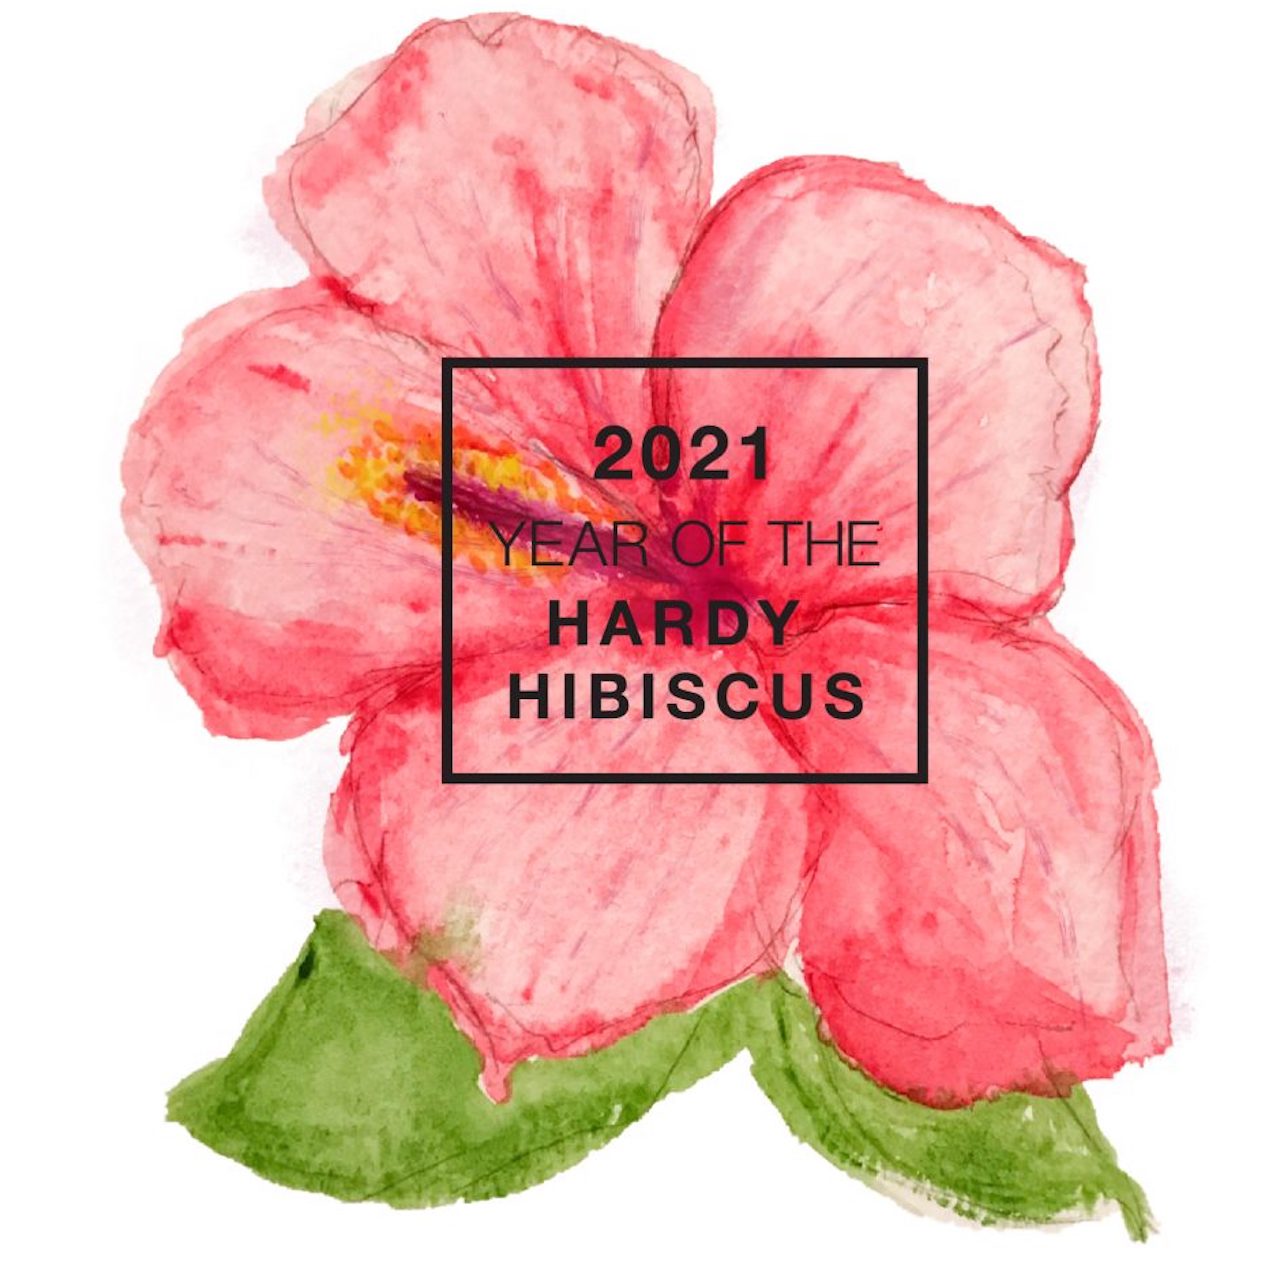 Reddish pink water color of hibiscus flower marked 2021 Year of the Hardy Hibiscus